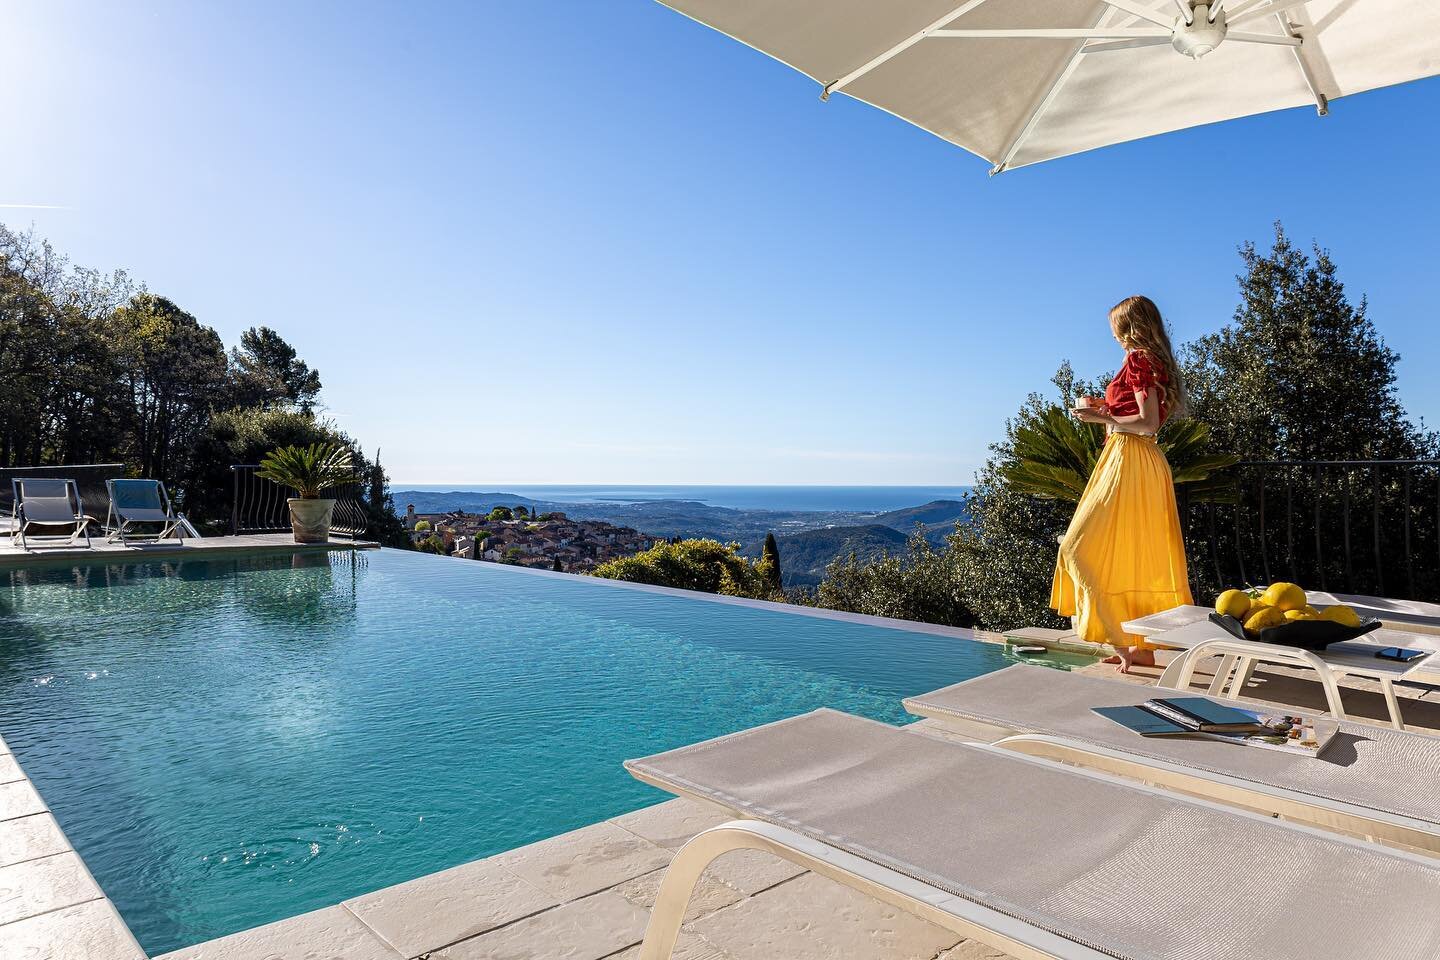 🇫🇷It&rsquo;s Time to explore one of the French Rivieras most beautiful Airbnbs: Villa Caprice

Needless to say you&rsquo;d have lots of fun shooting an editorial with your friends around this property: currently live on Airbnb 🙏🏼

🌎Click the lin